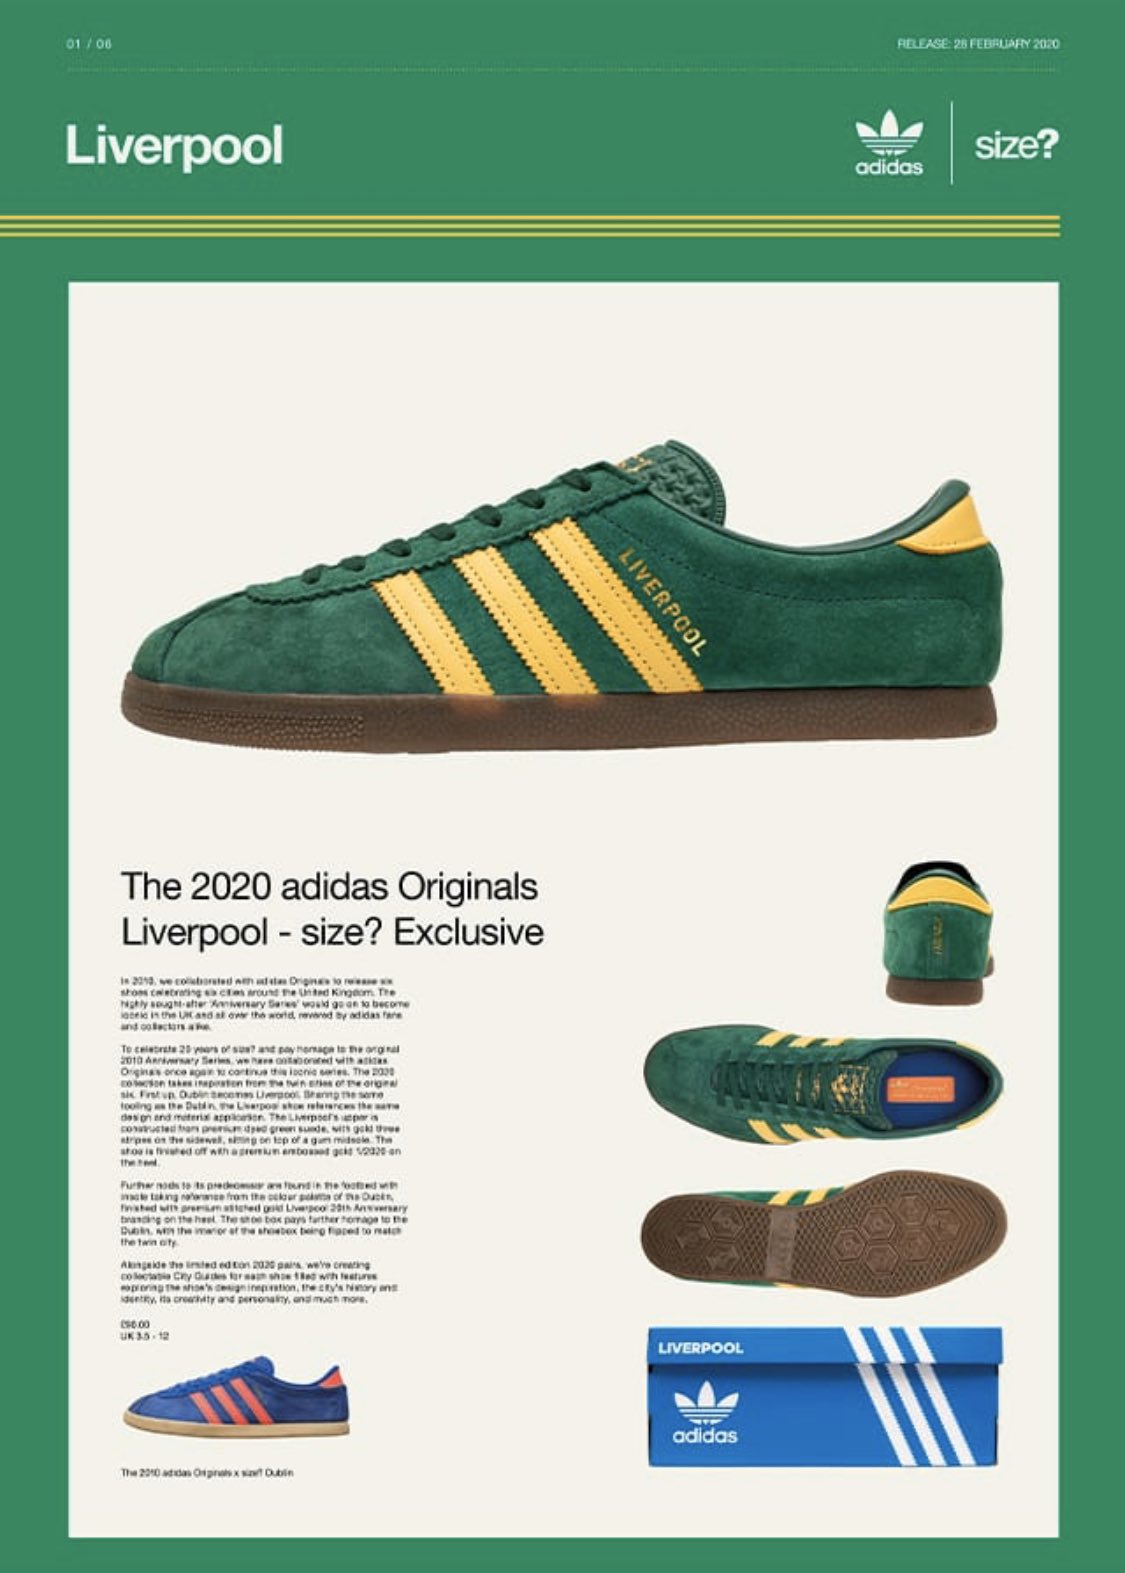 acantilado Talla Travieso Man Savings on Twitter: "More info on the adidas Liverpool - Size 20th  Anniversary Release date 28th Feb - 2020 pairs available.  https://t.co/gkvBAlo0RX" / Twitter